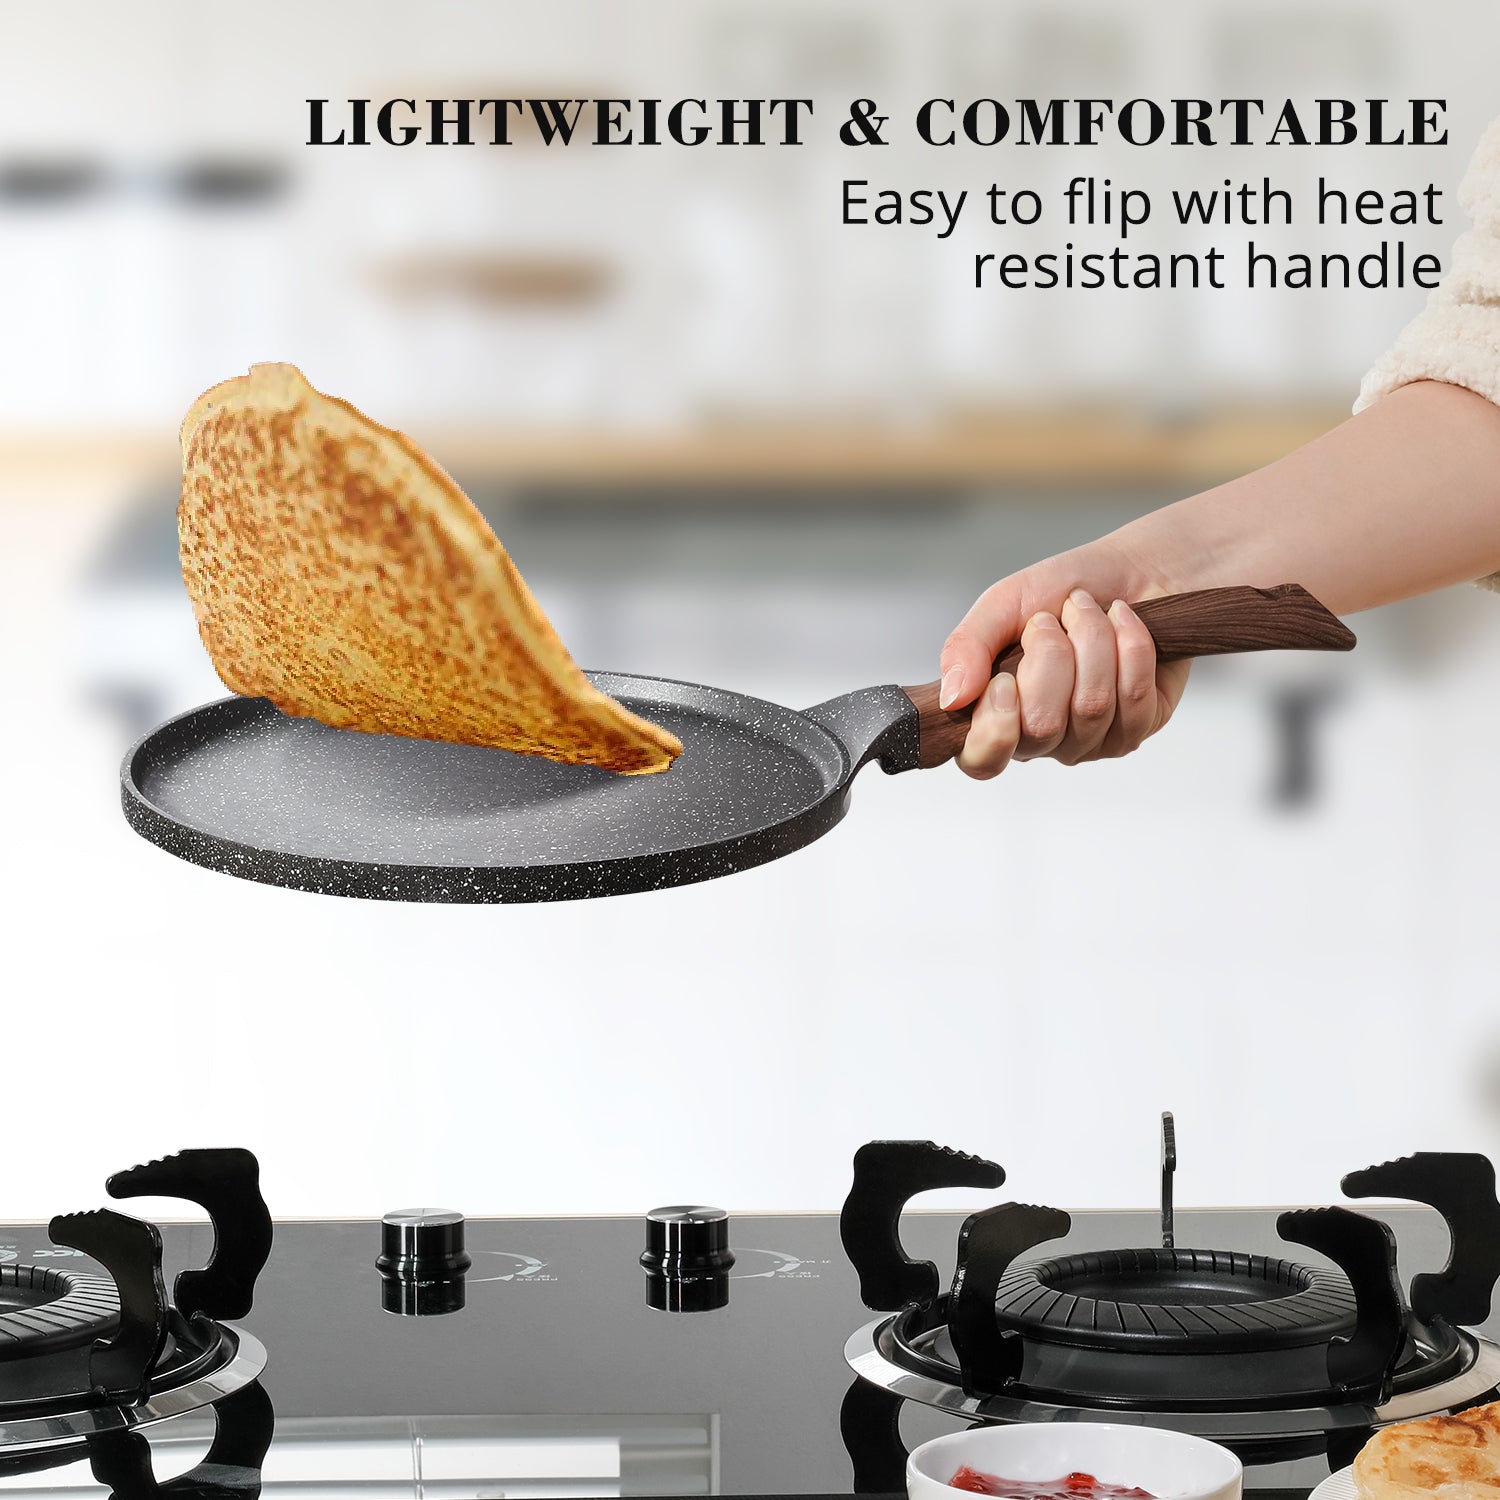 Introducing SENSARTE Starlight Collection: The Ultimate Nonstick